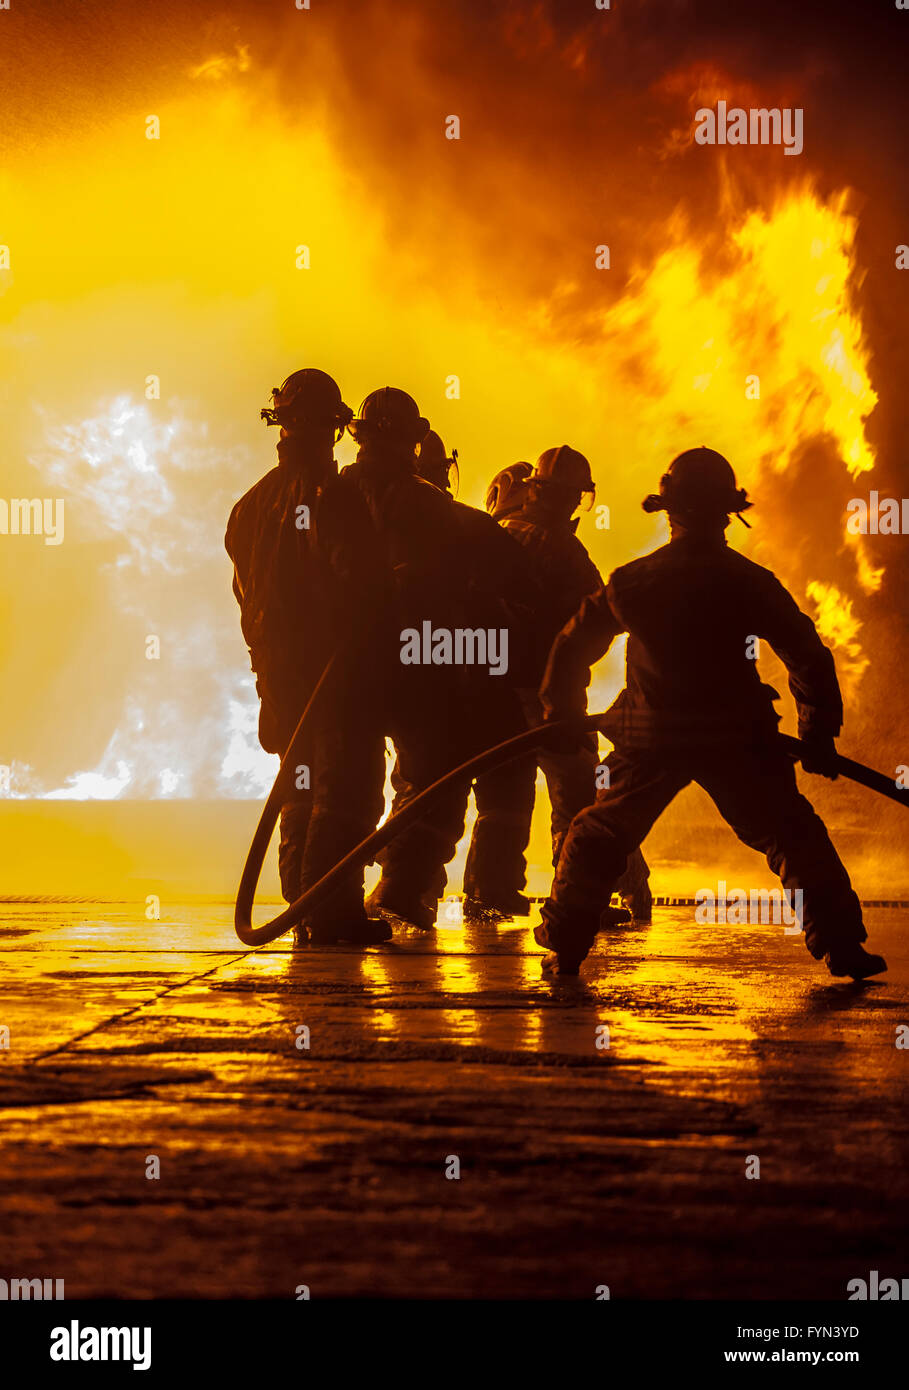 Firefighter bracing during firefighting Stock Photo